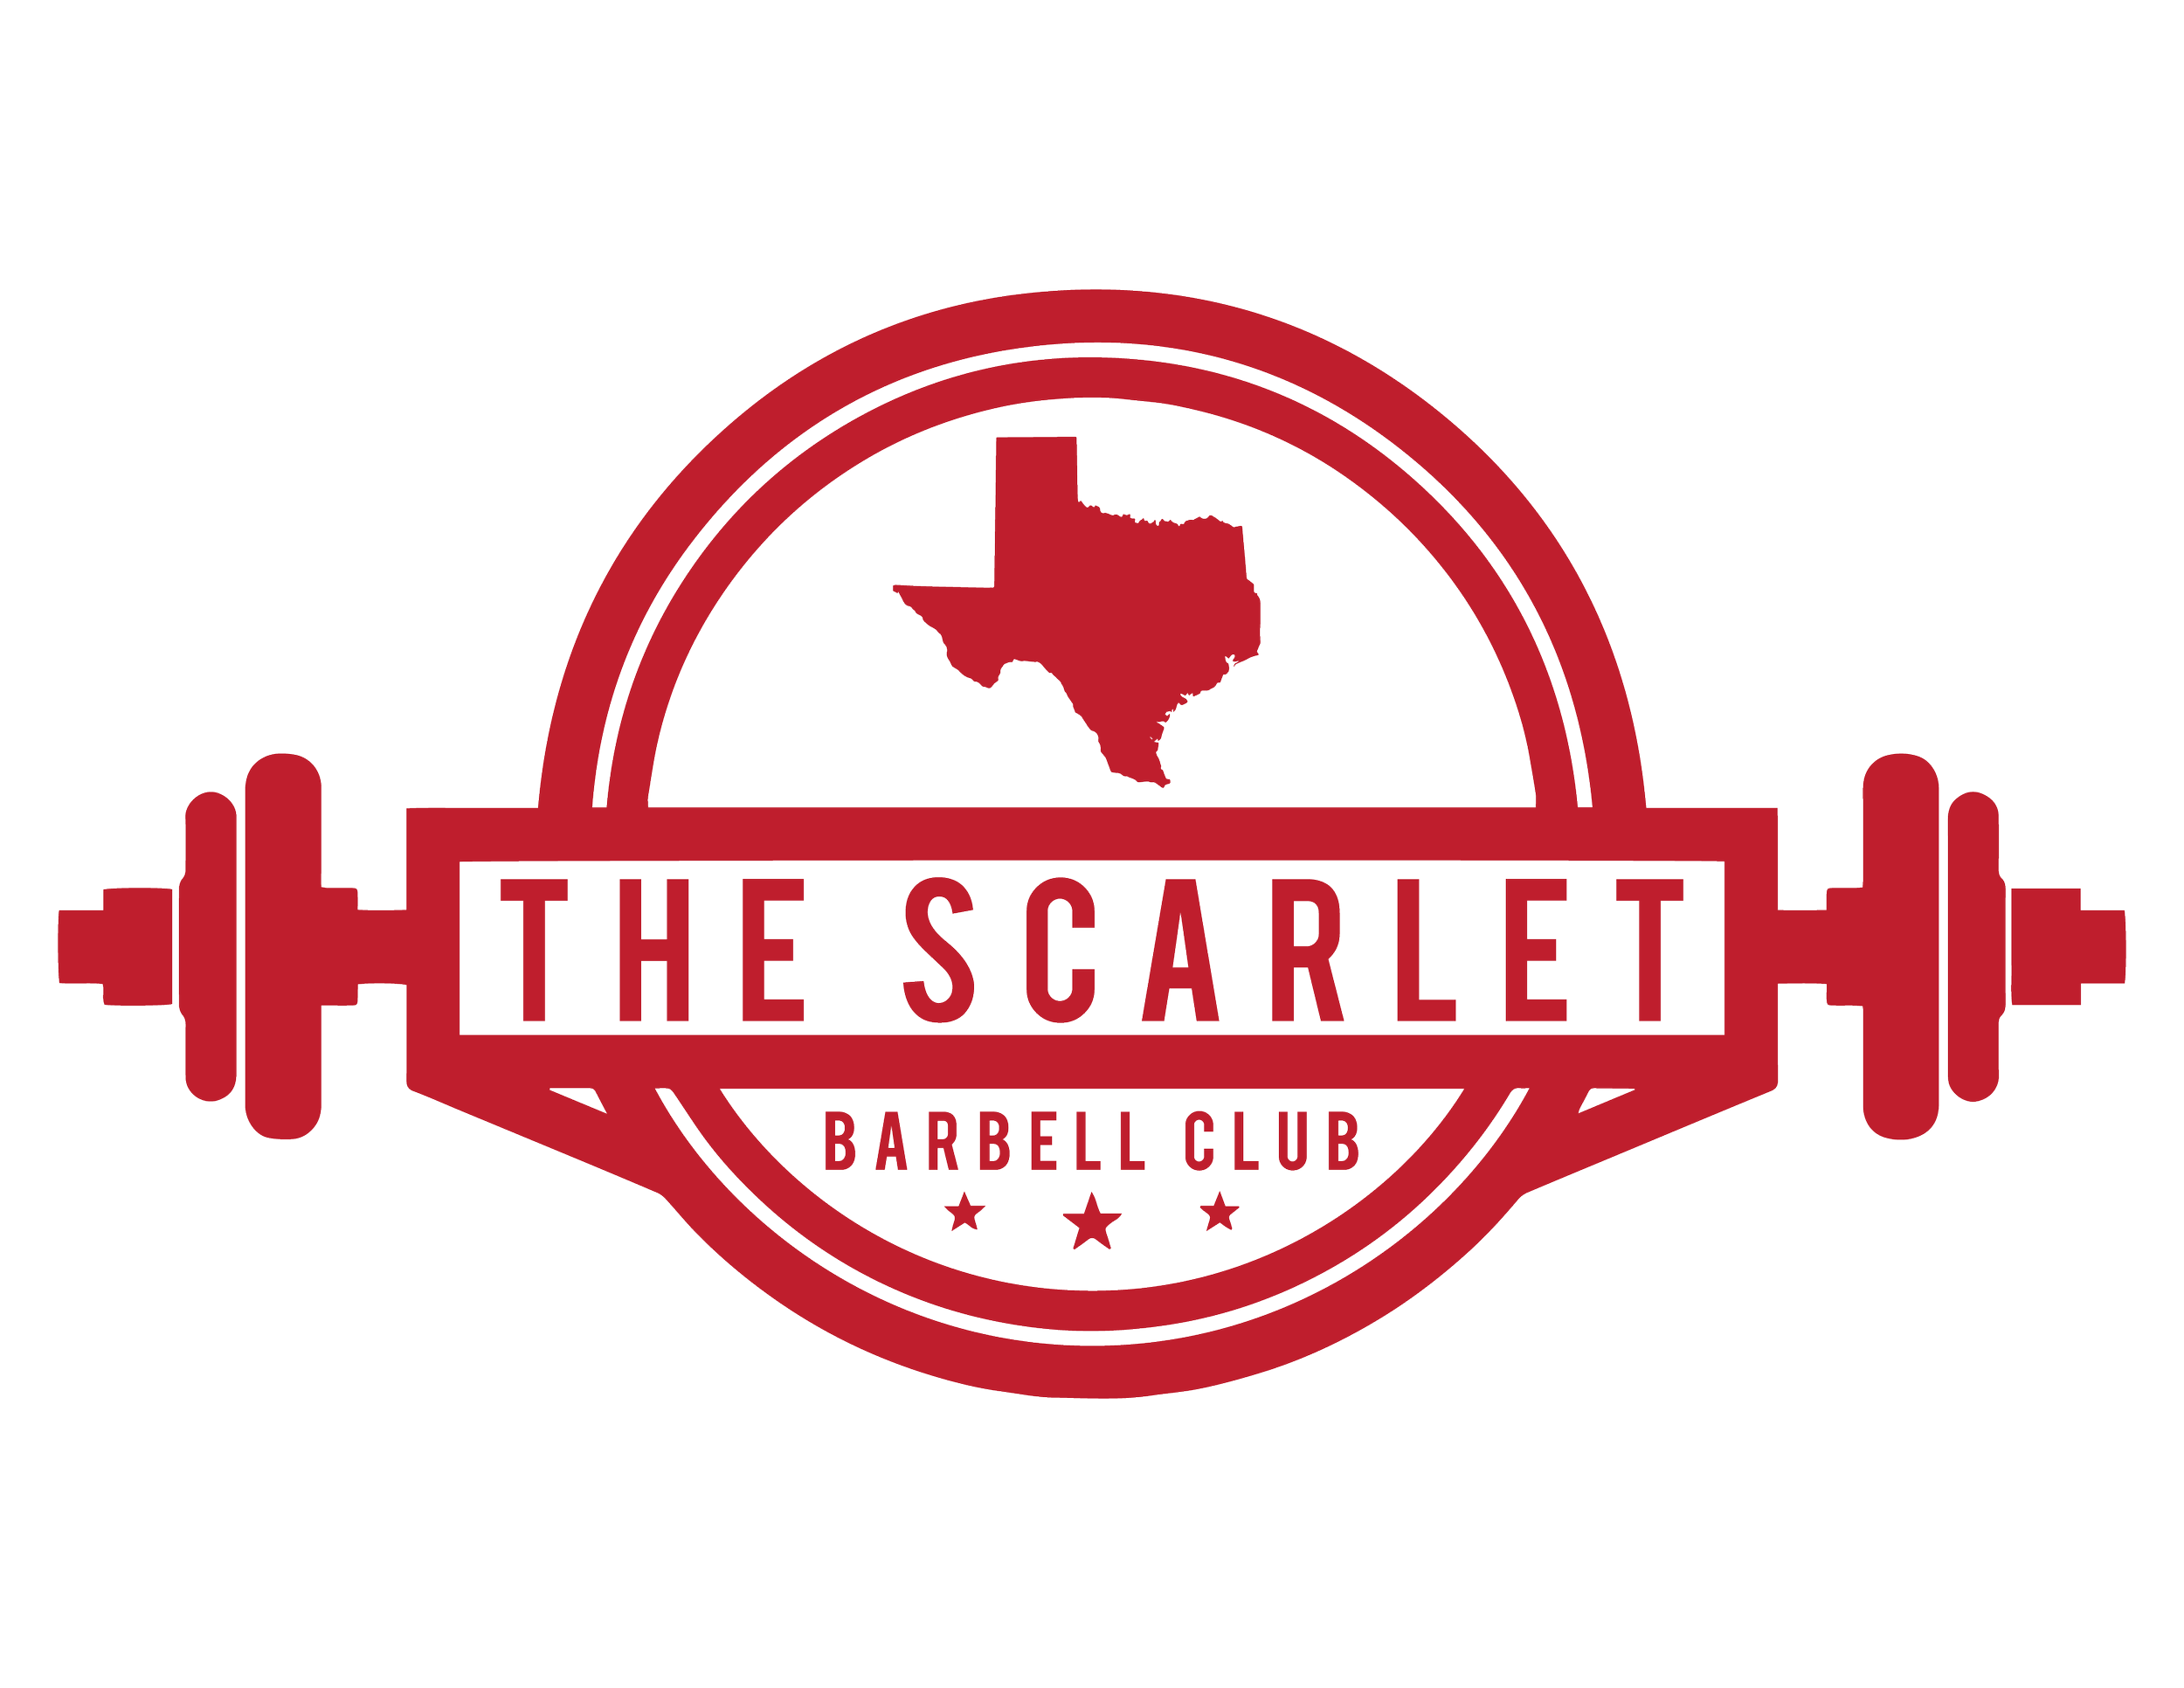 THE SCARLET BARBELL Club